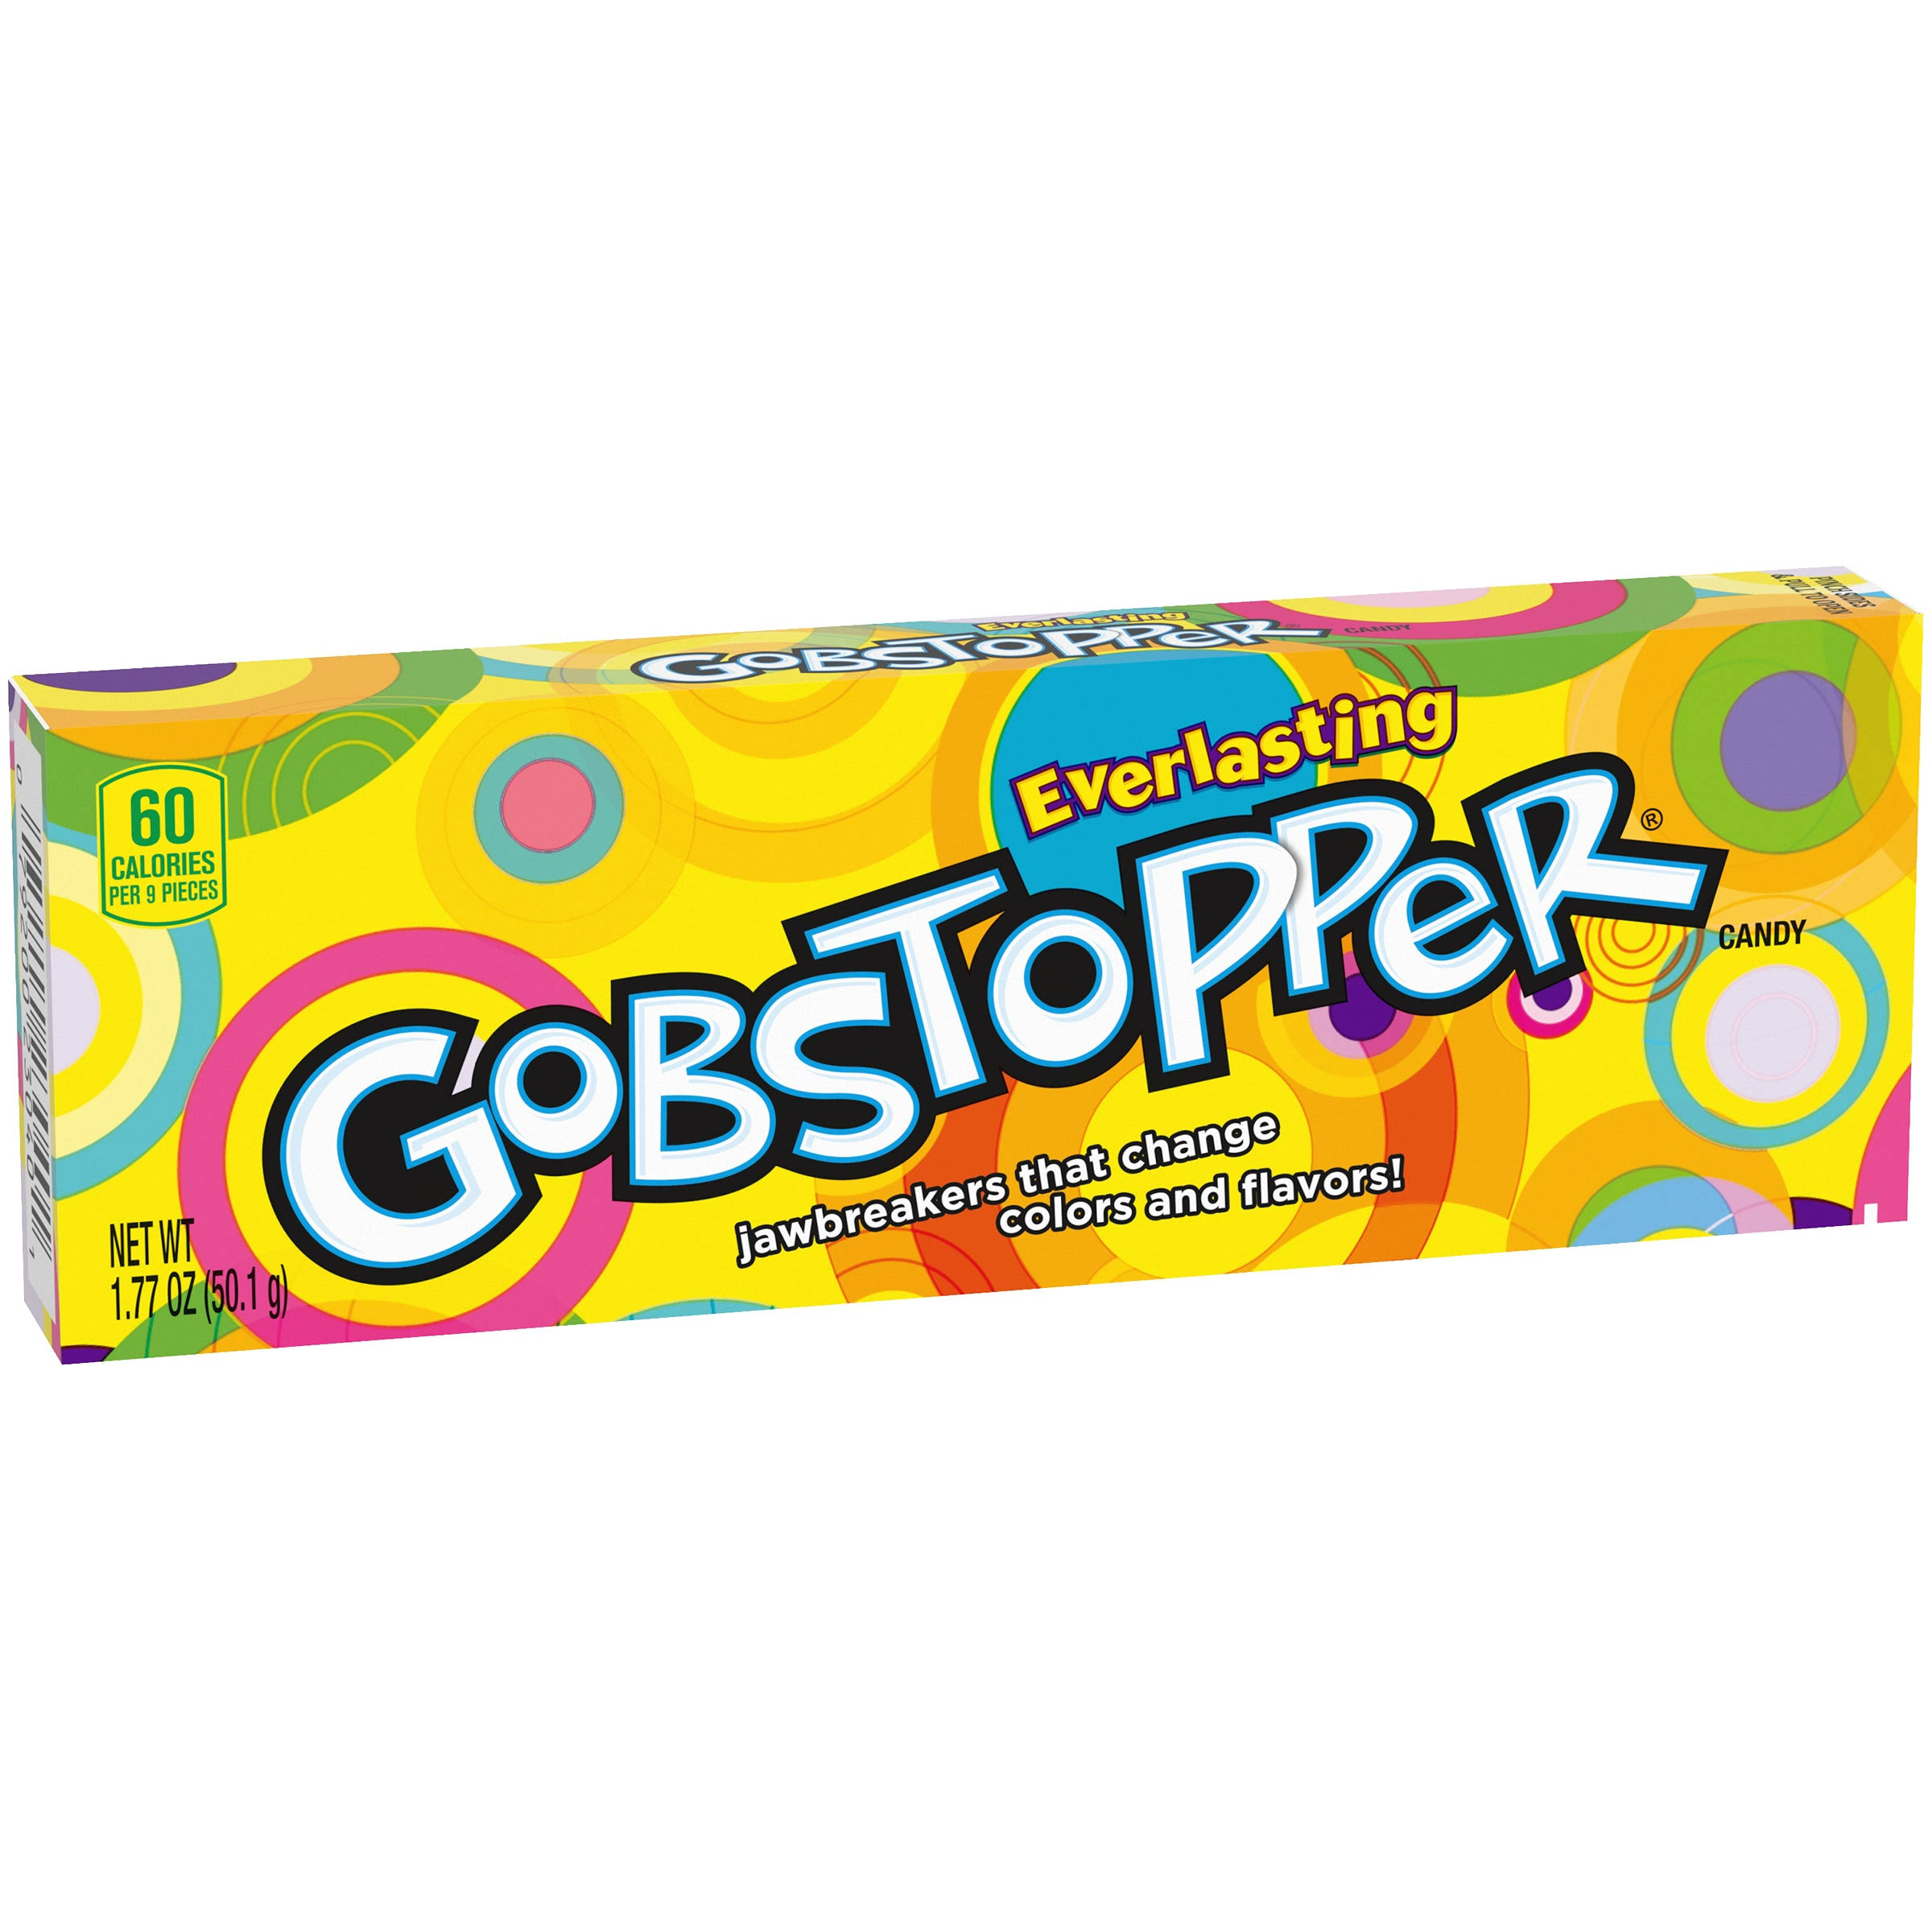 Wonka Everlasting Gobstoppers Candy